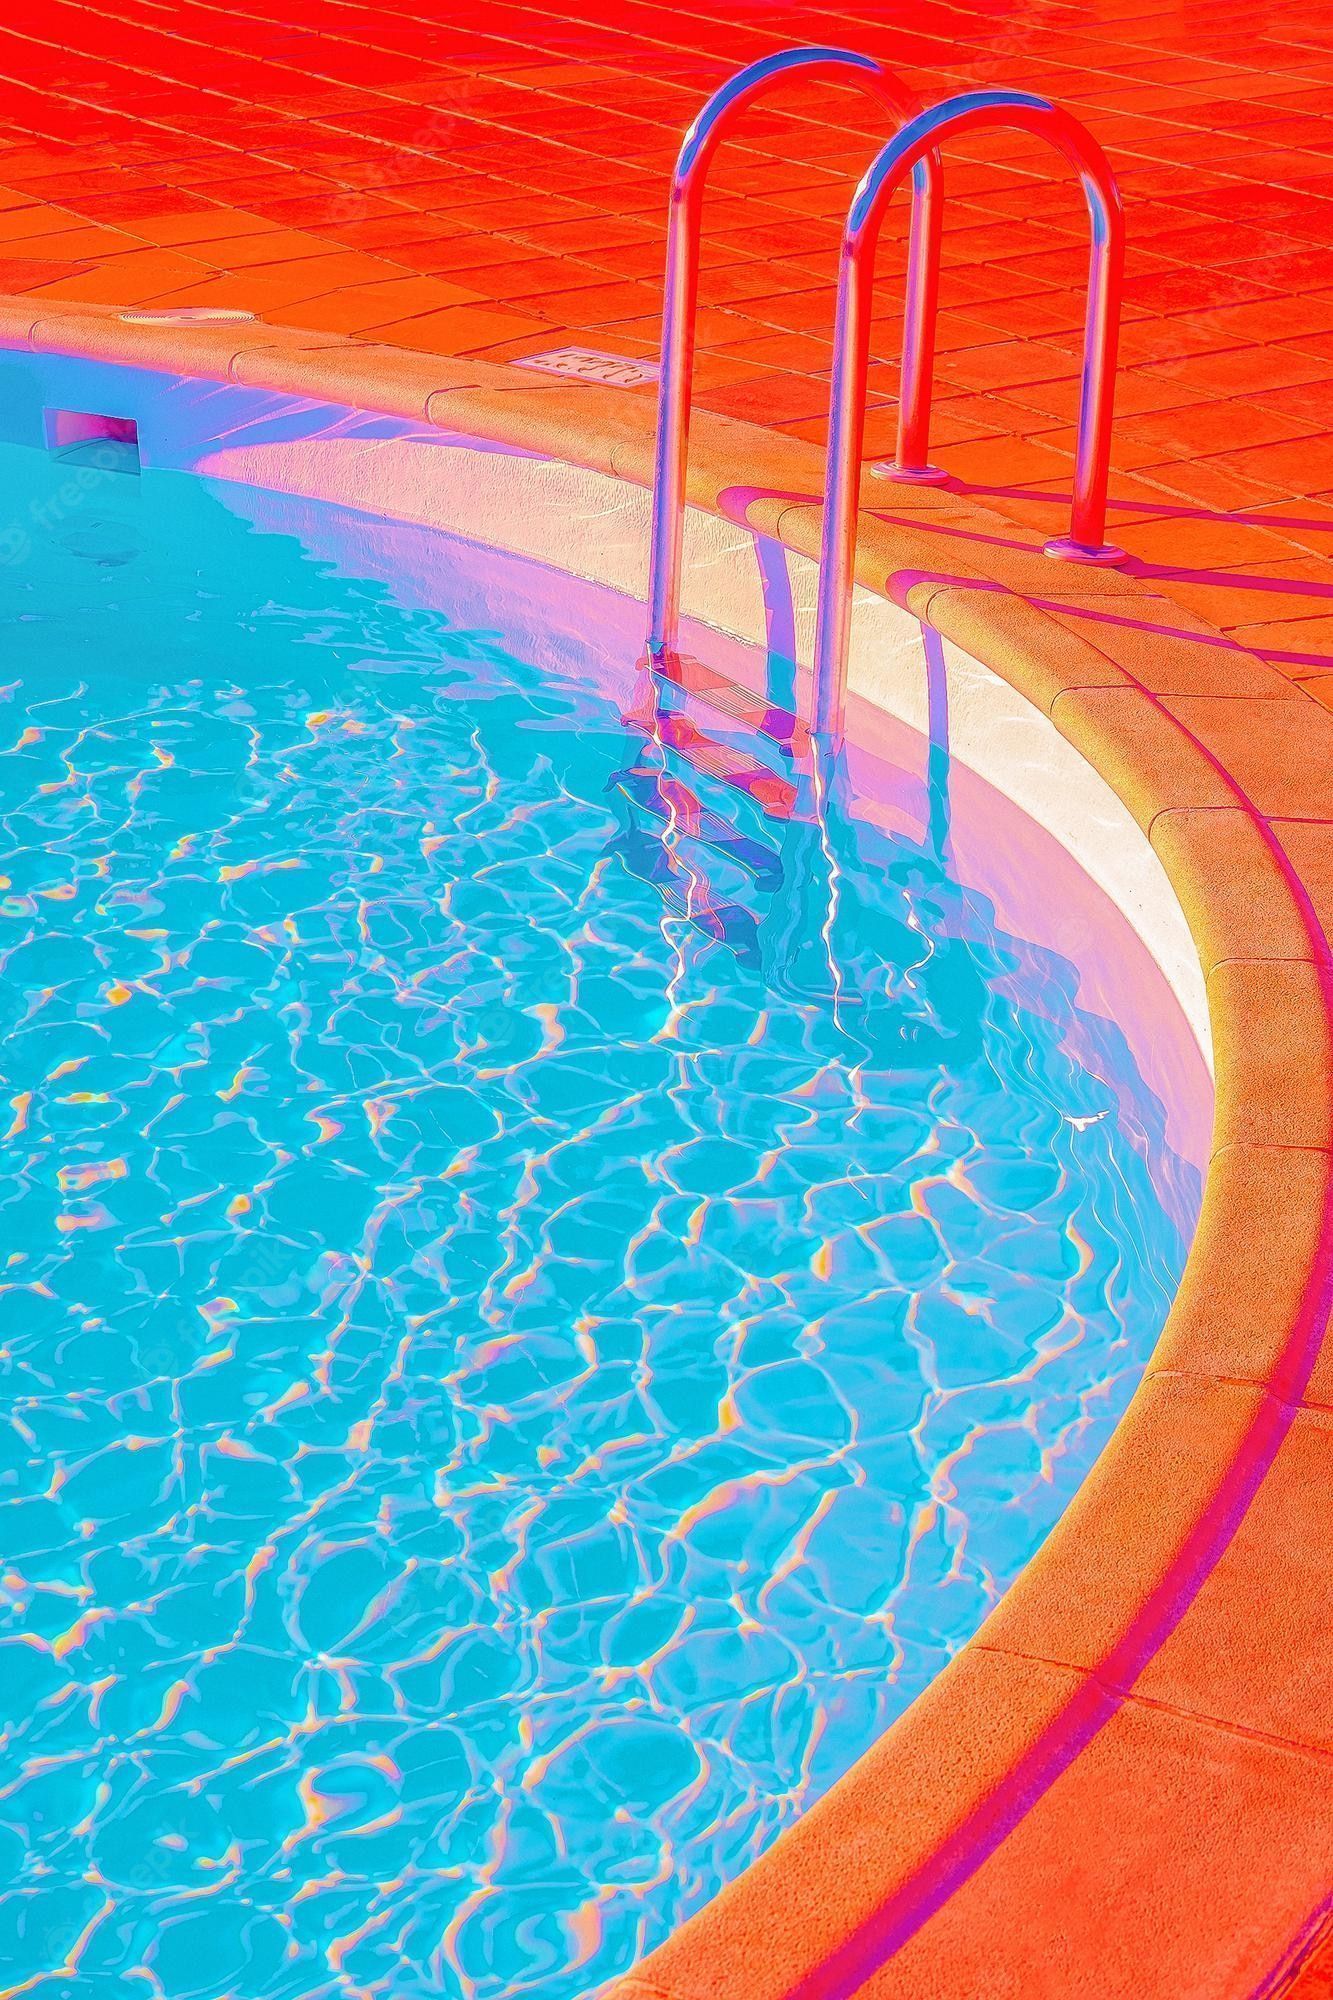 A pool with water and blue tiles - Swimming pool